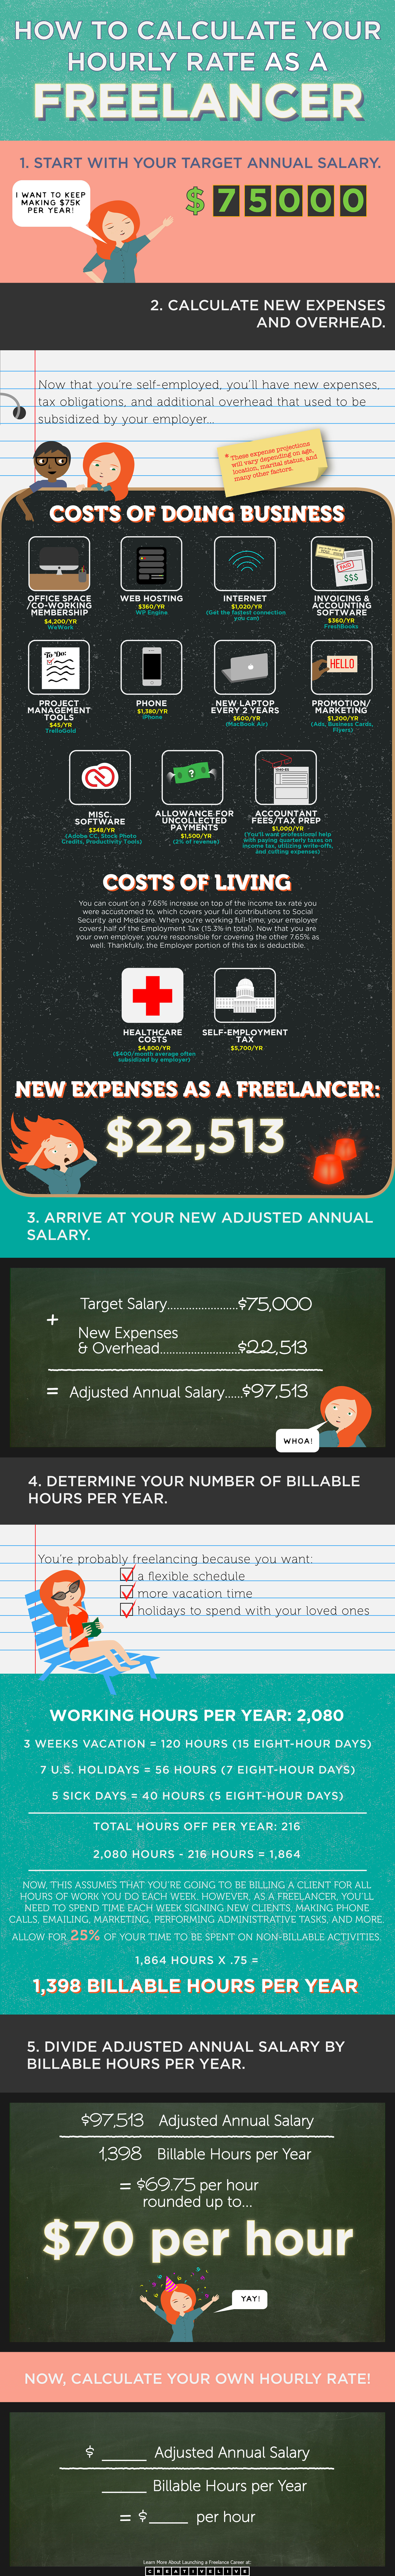 How to Calculate Your Freelance Rate  - Infographic